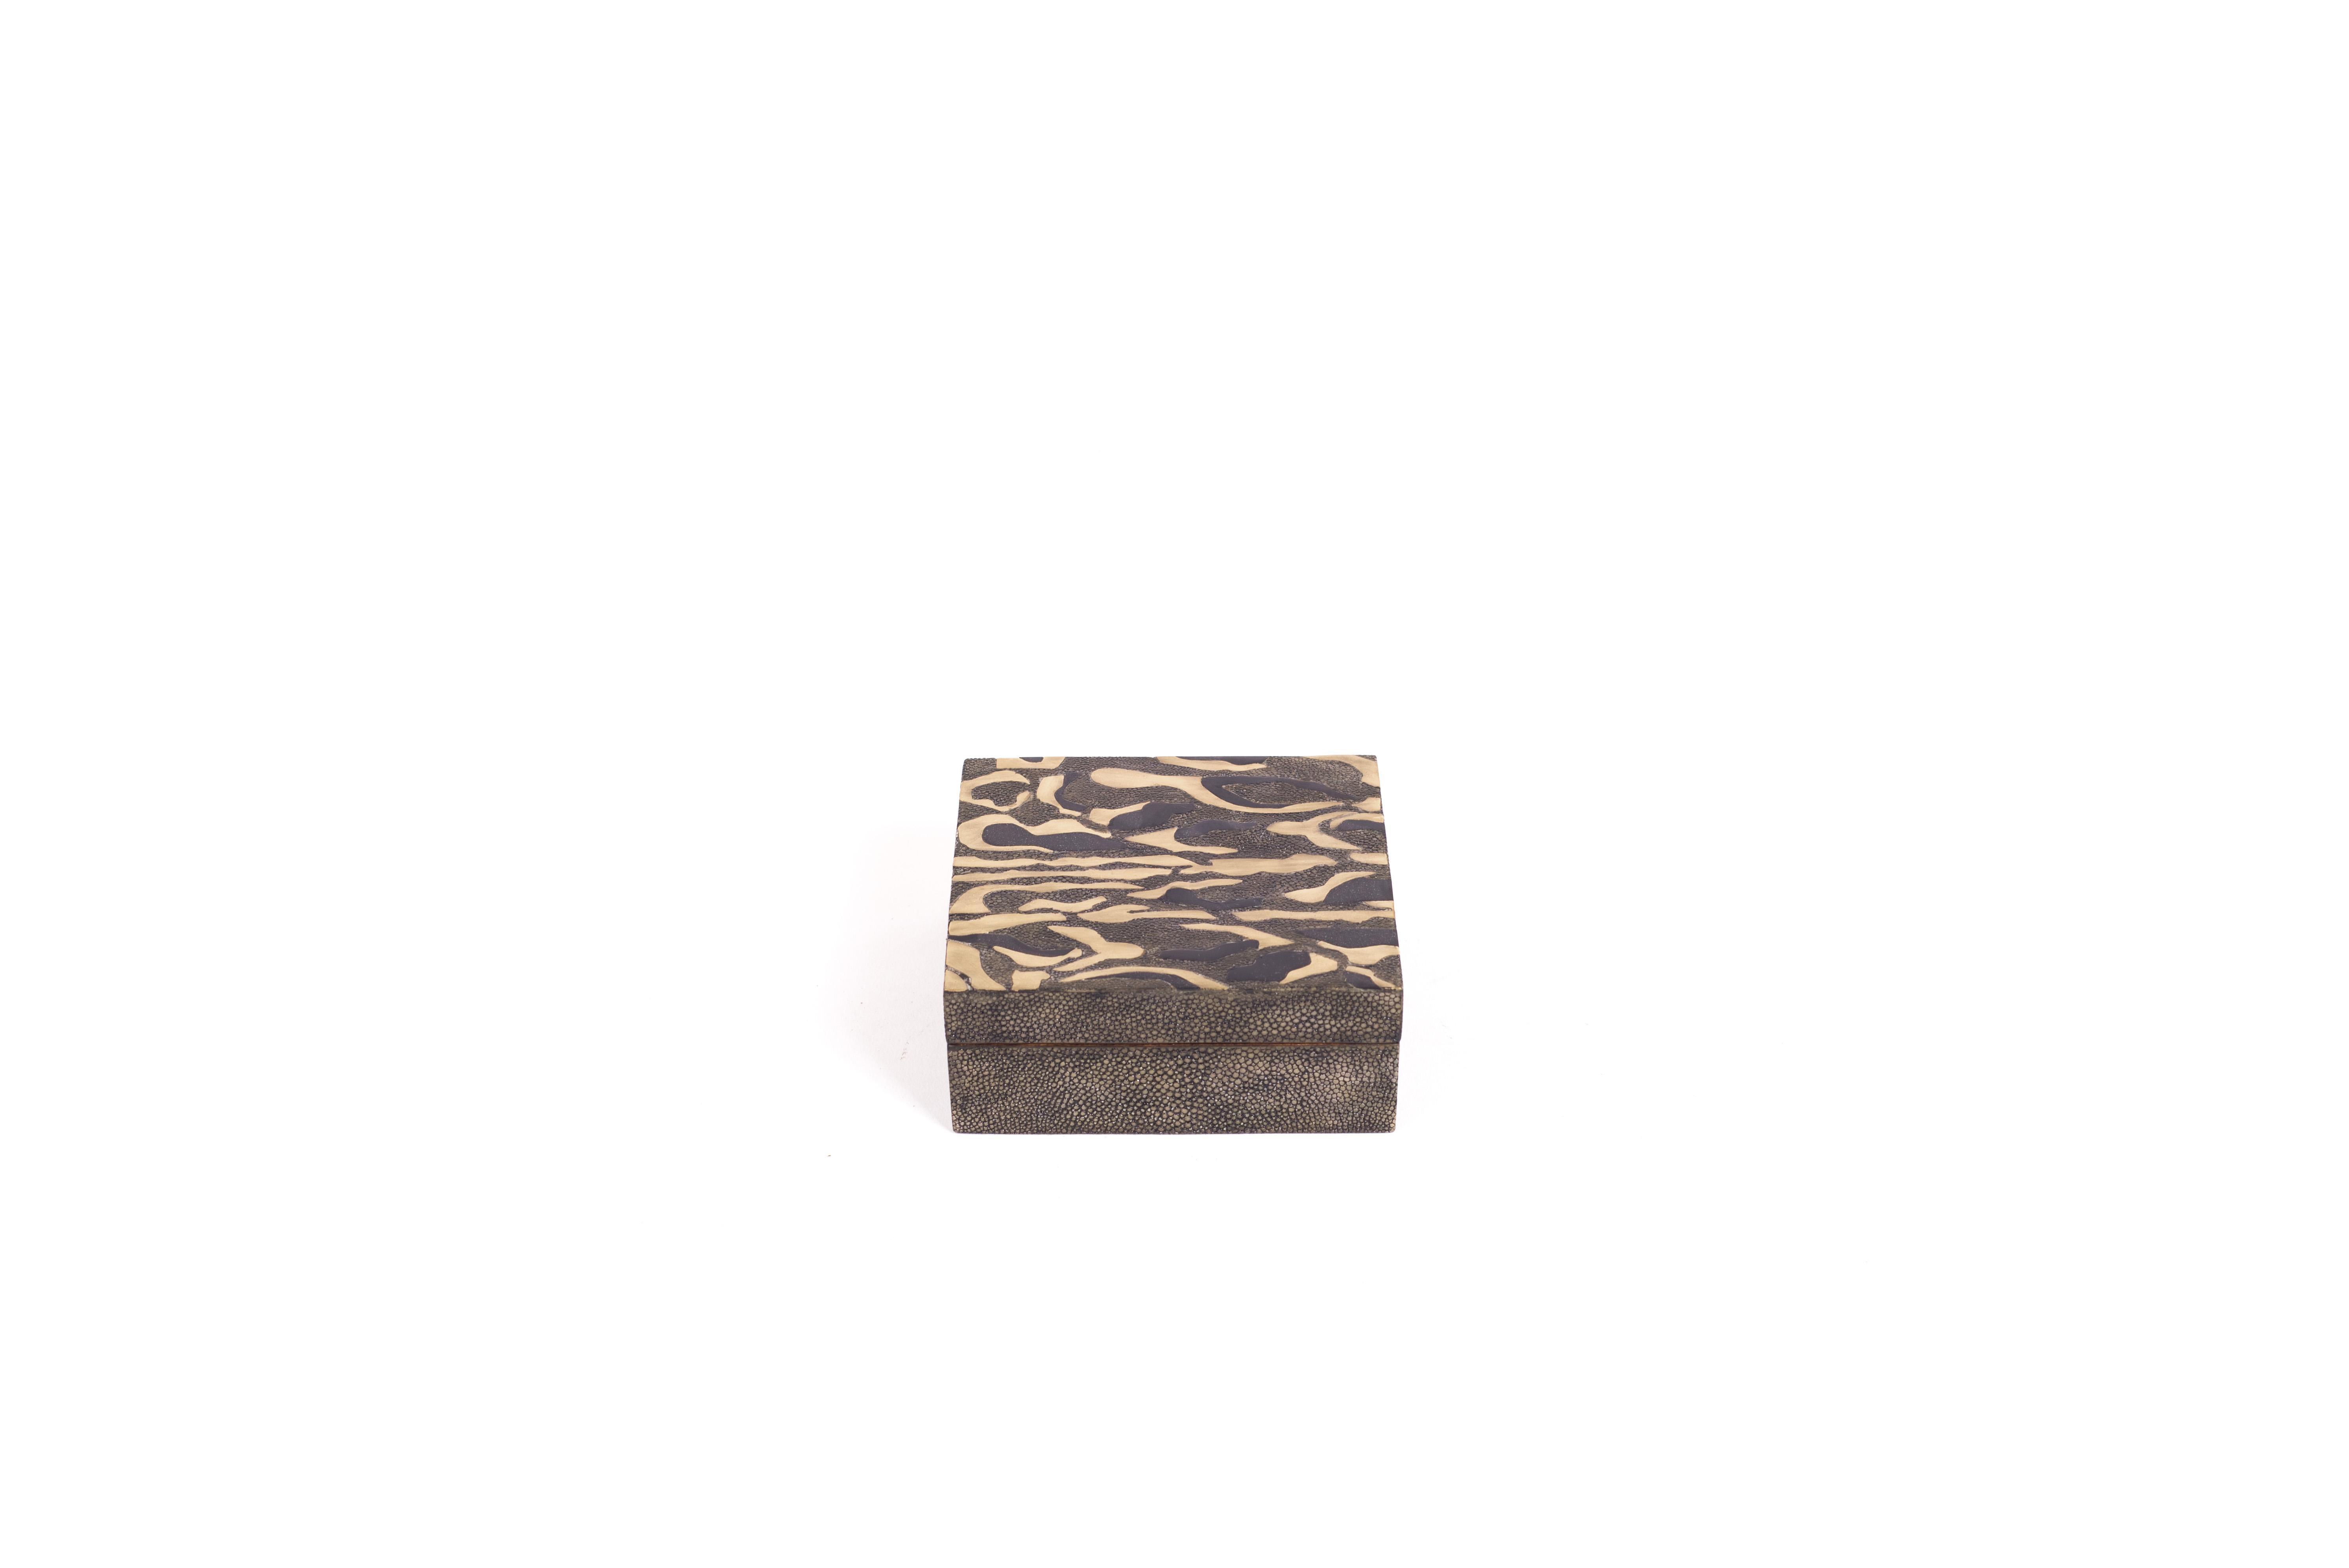 Inlay Shagreen Leopard Pattern Box with Shell and Brass Details by Kifu Paris For Sale